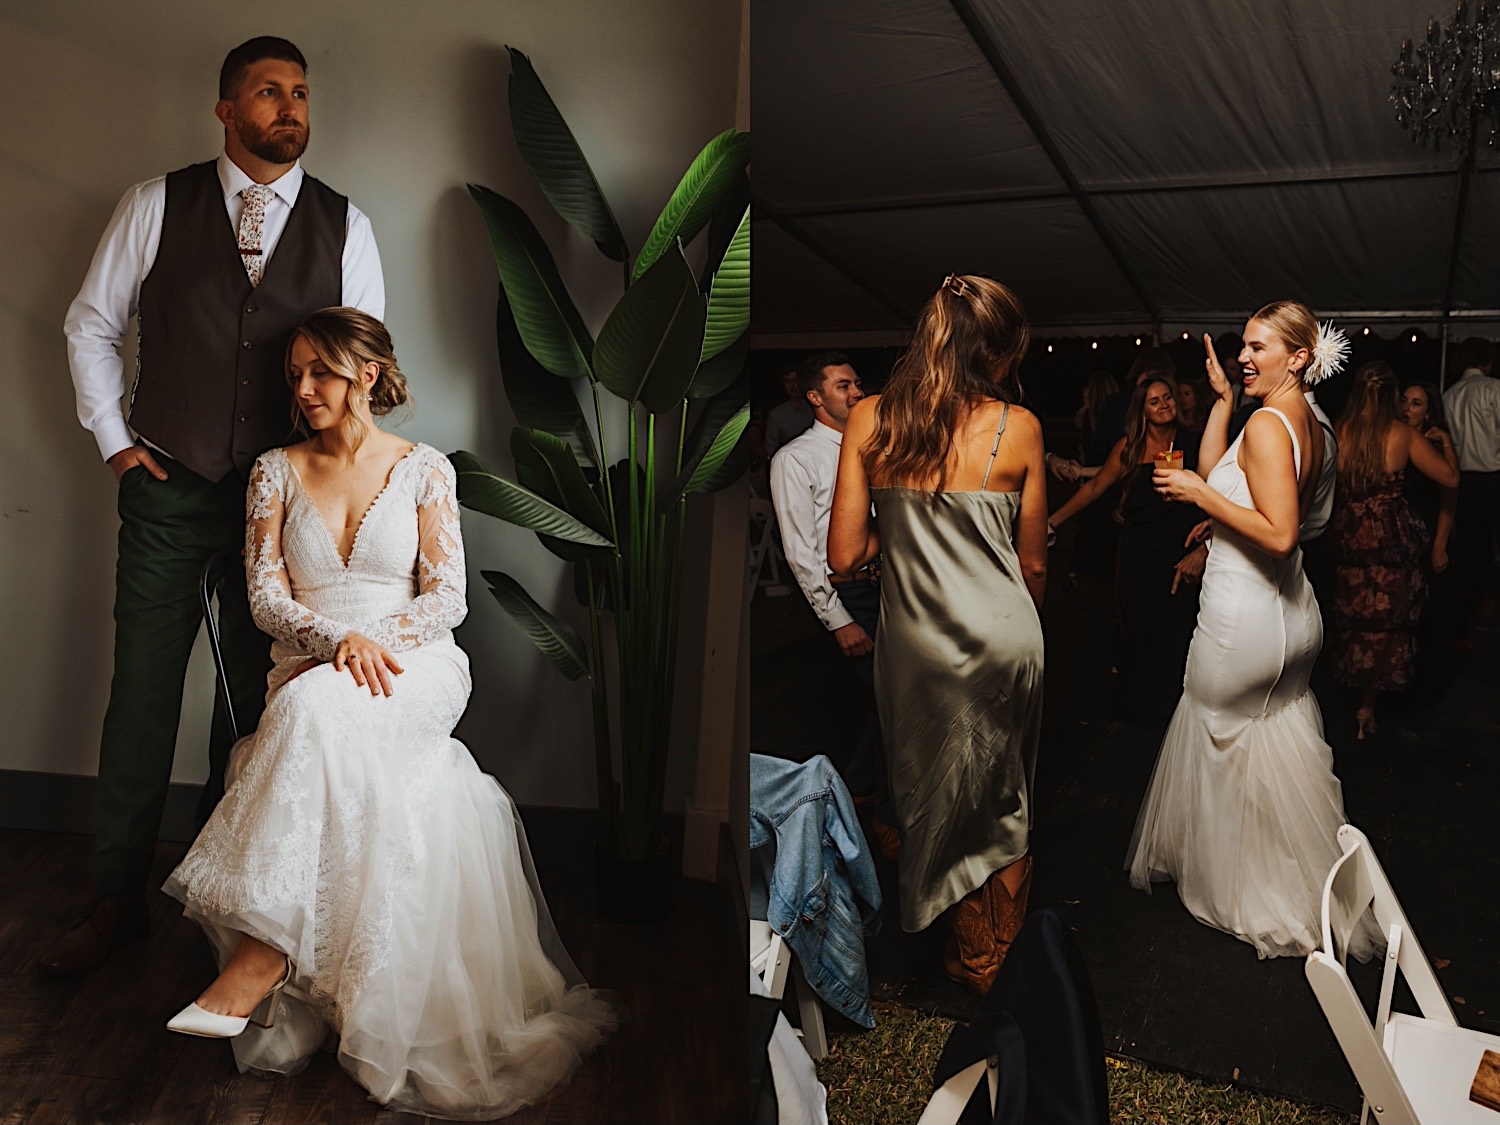 2 photos side by side, the left is of a bride sitting in a chair while the groom stands behind her, the right is of a different bride dancing during her wedding reception